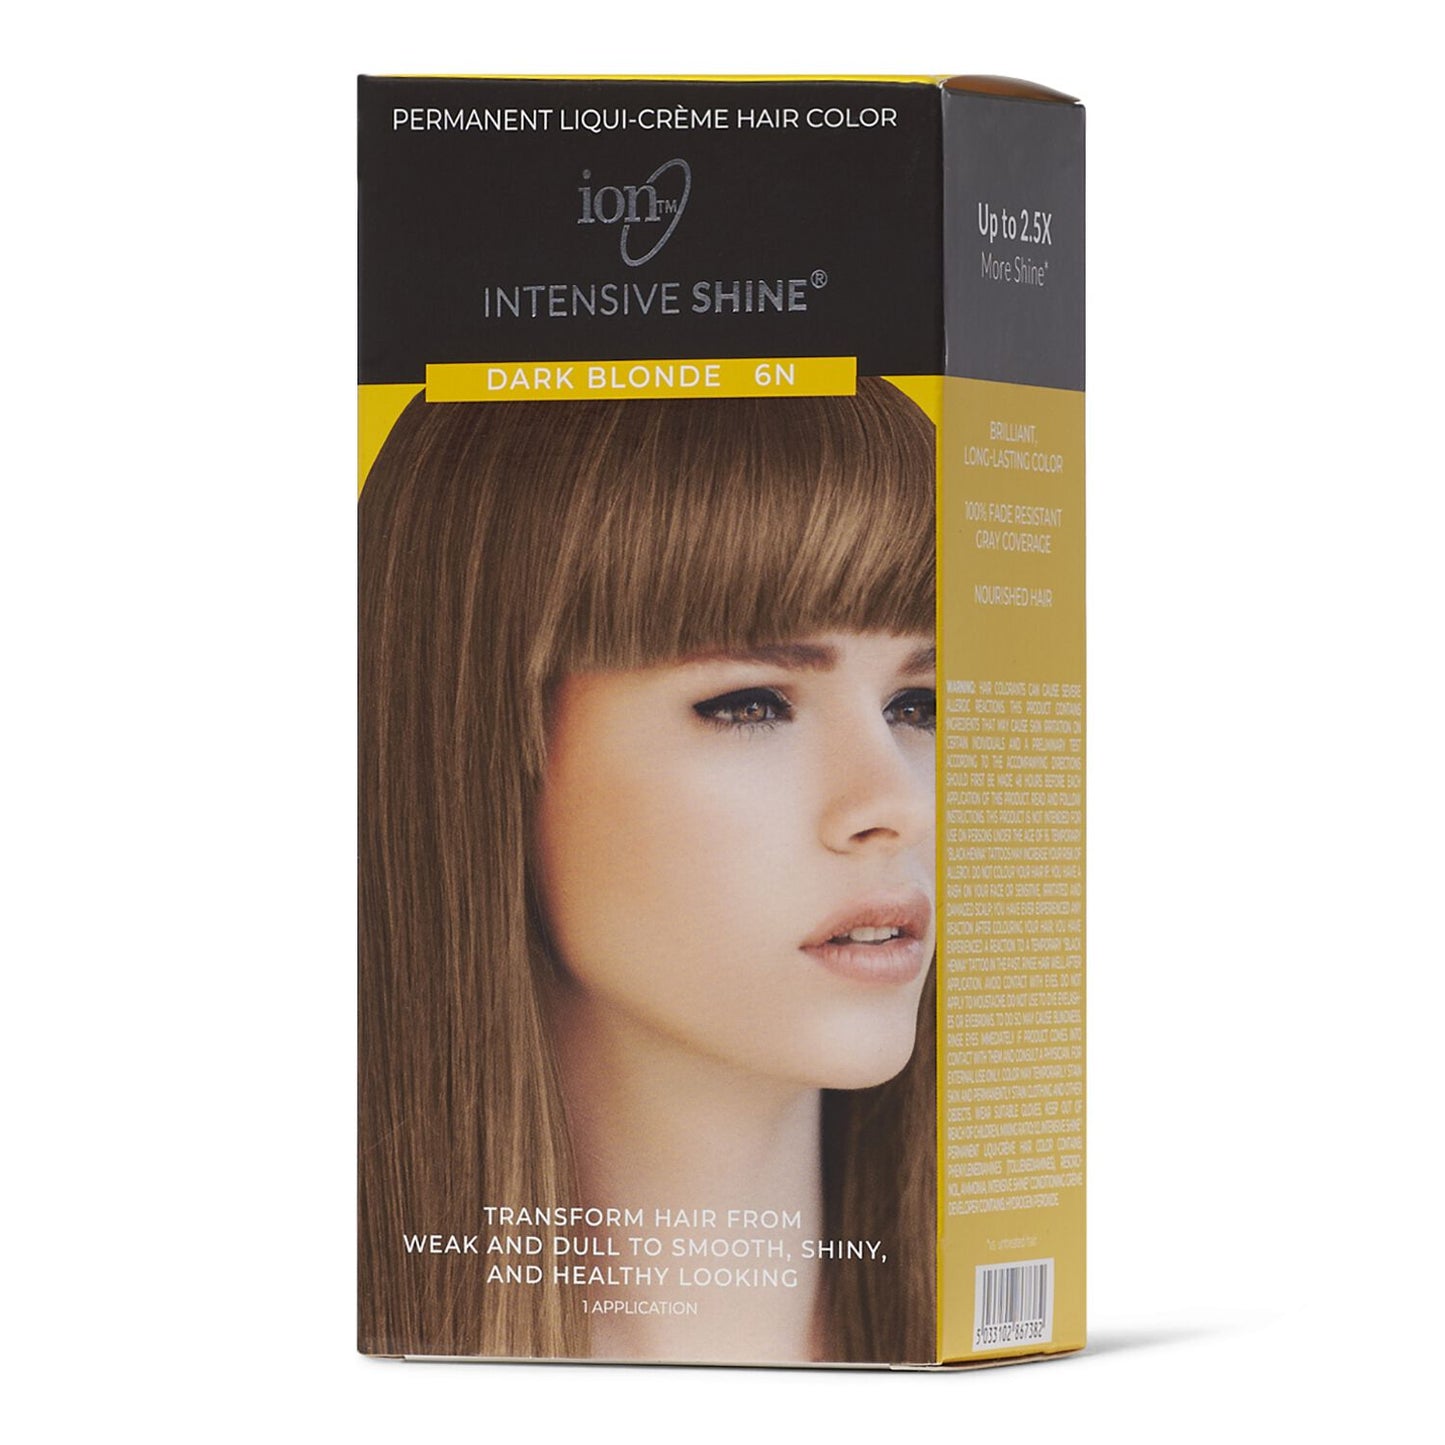 Intensive Shine  by   ion Intensive Shine Hair Color Kit Dark Blonde 6N